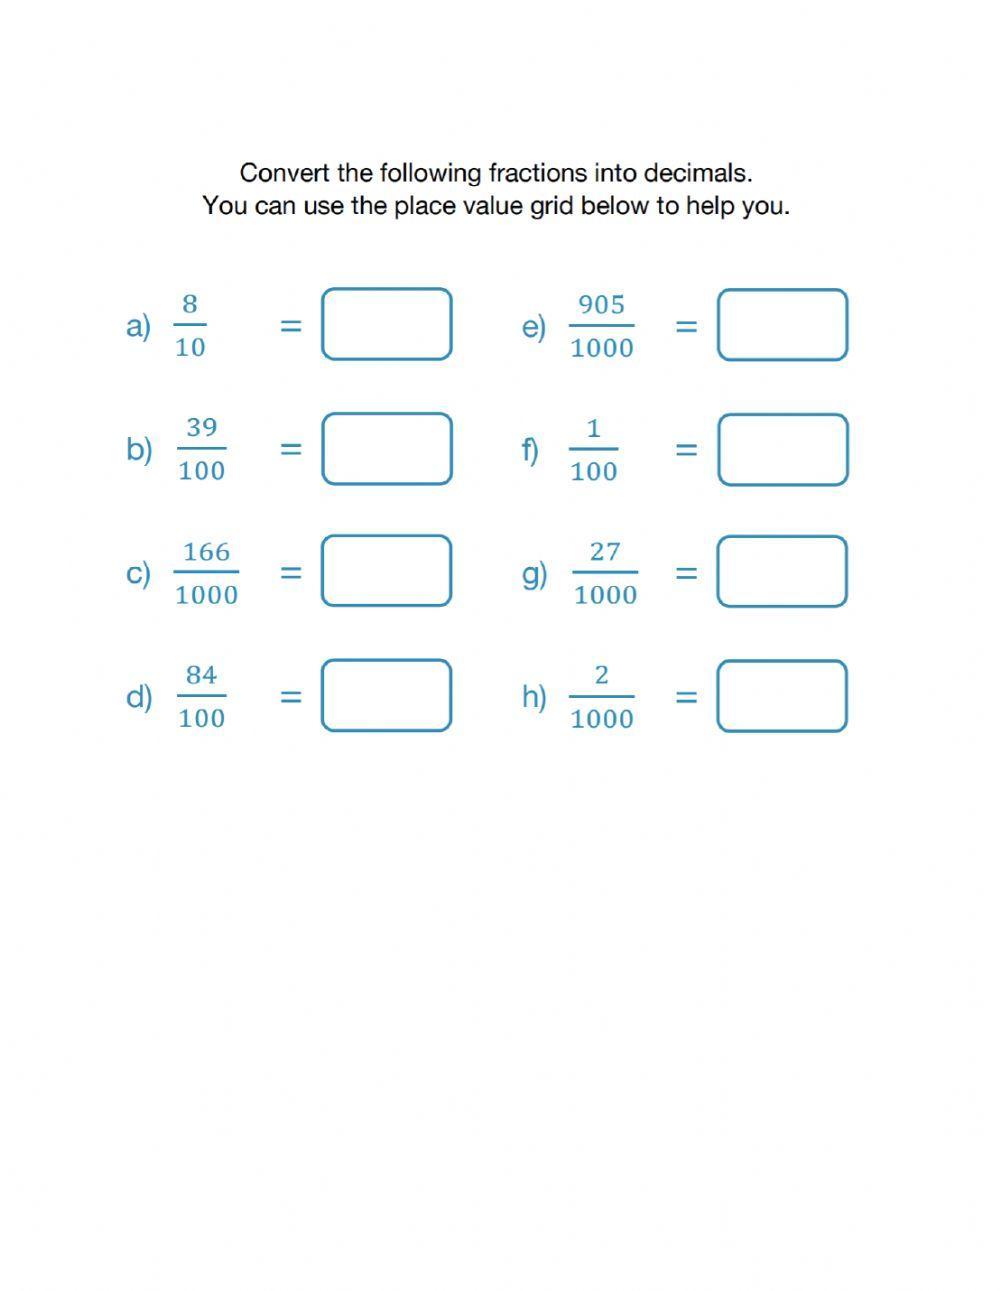 Changing fraction to decimals